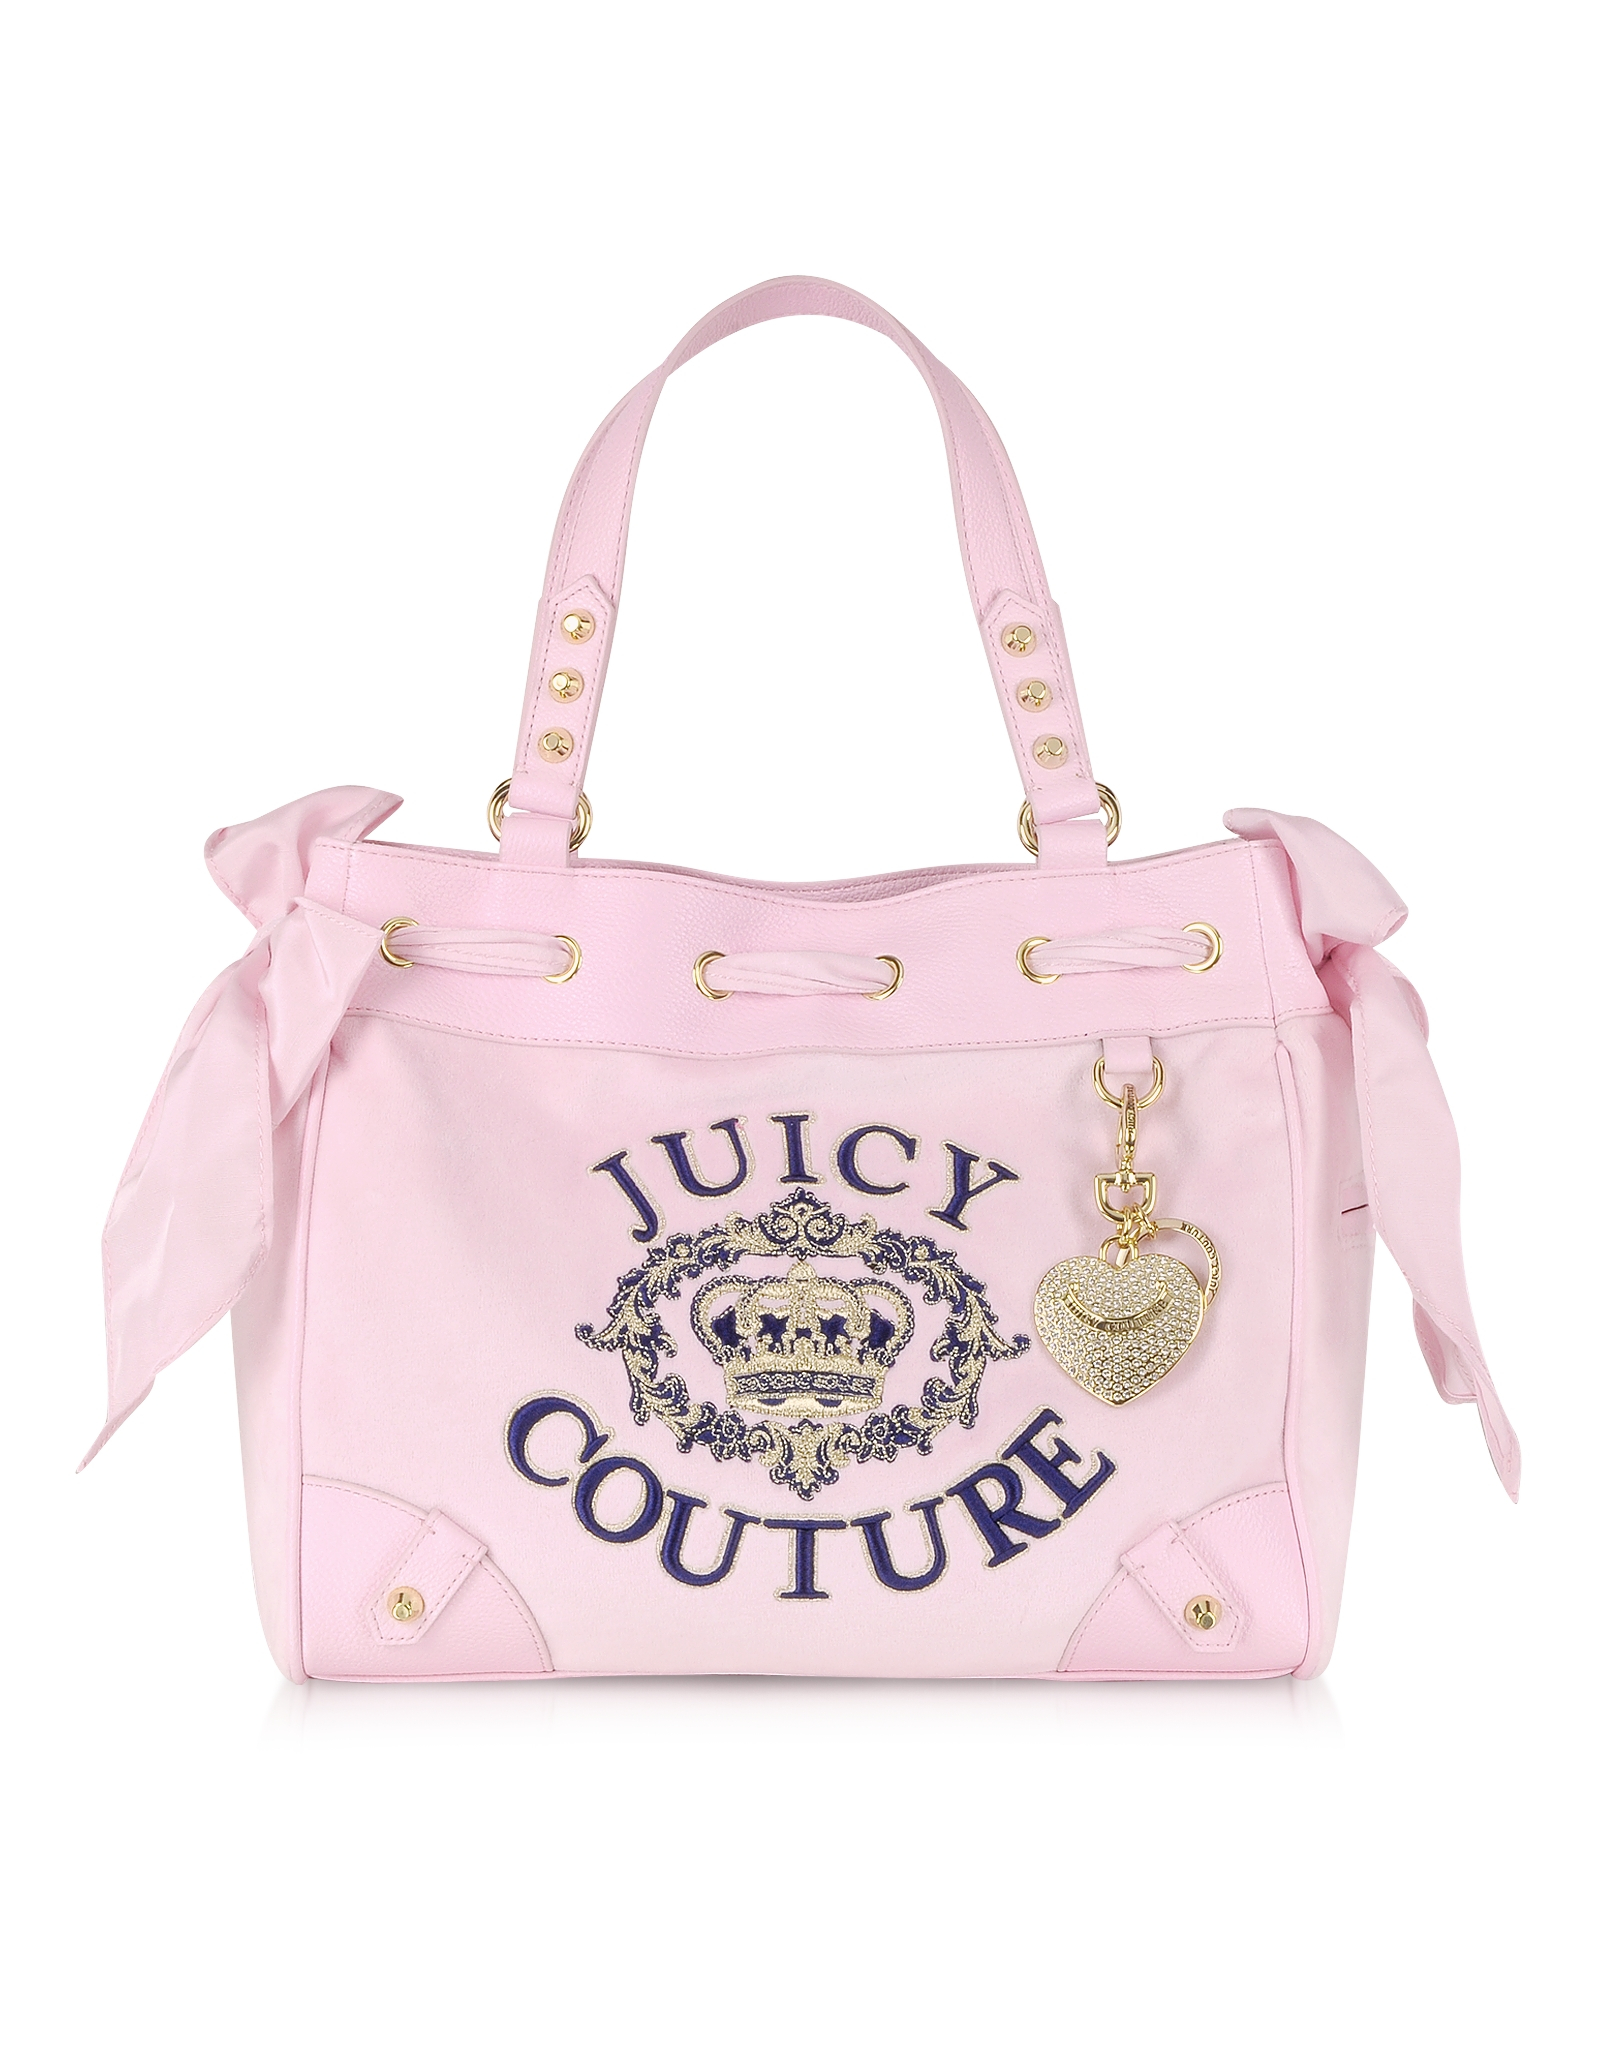 Juicy Couture Juicy Crown Velour Daydreamer Tote in Pink | Lyst